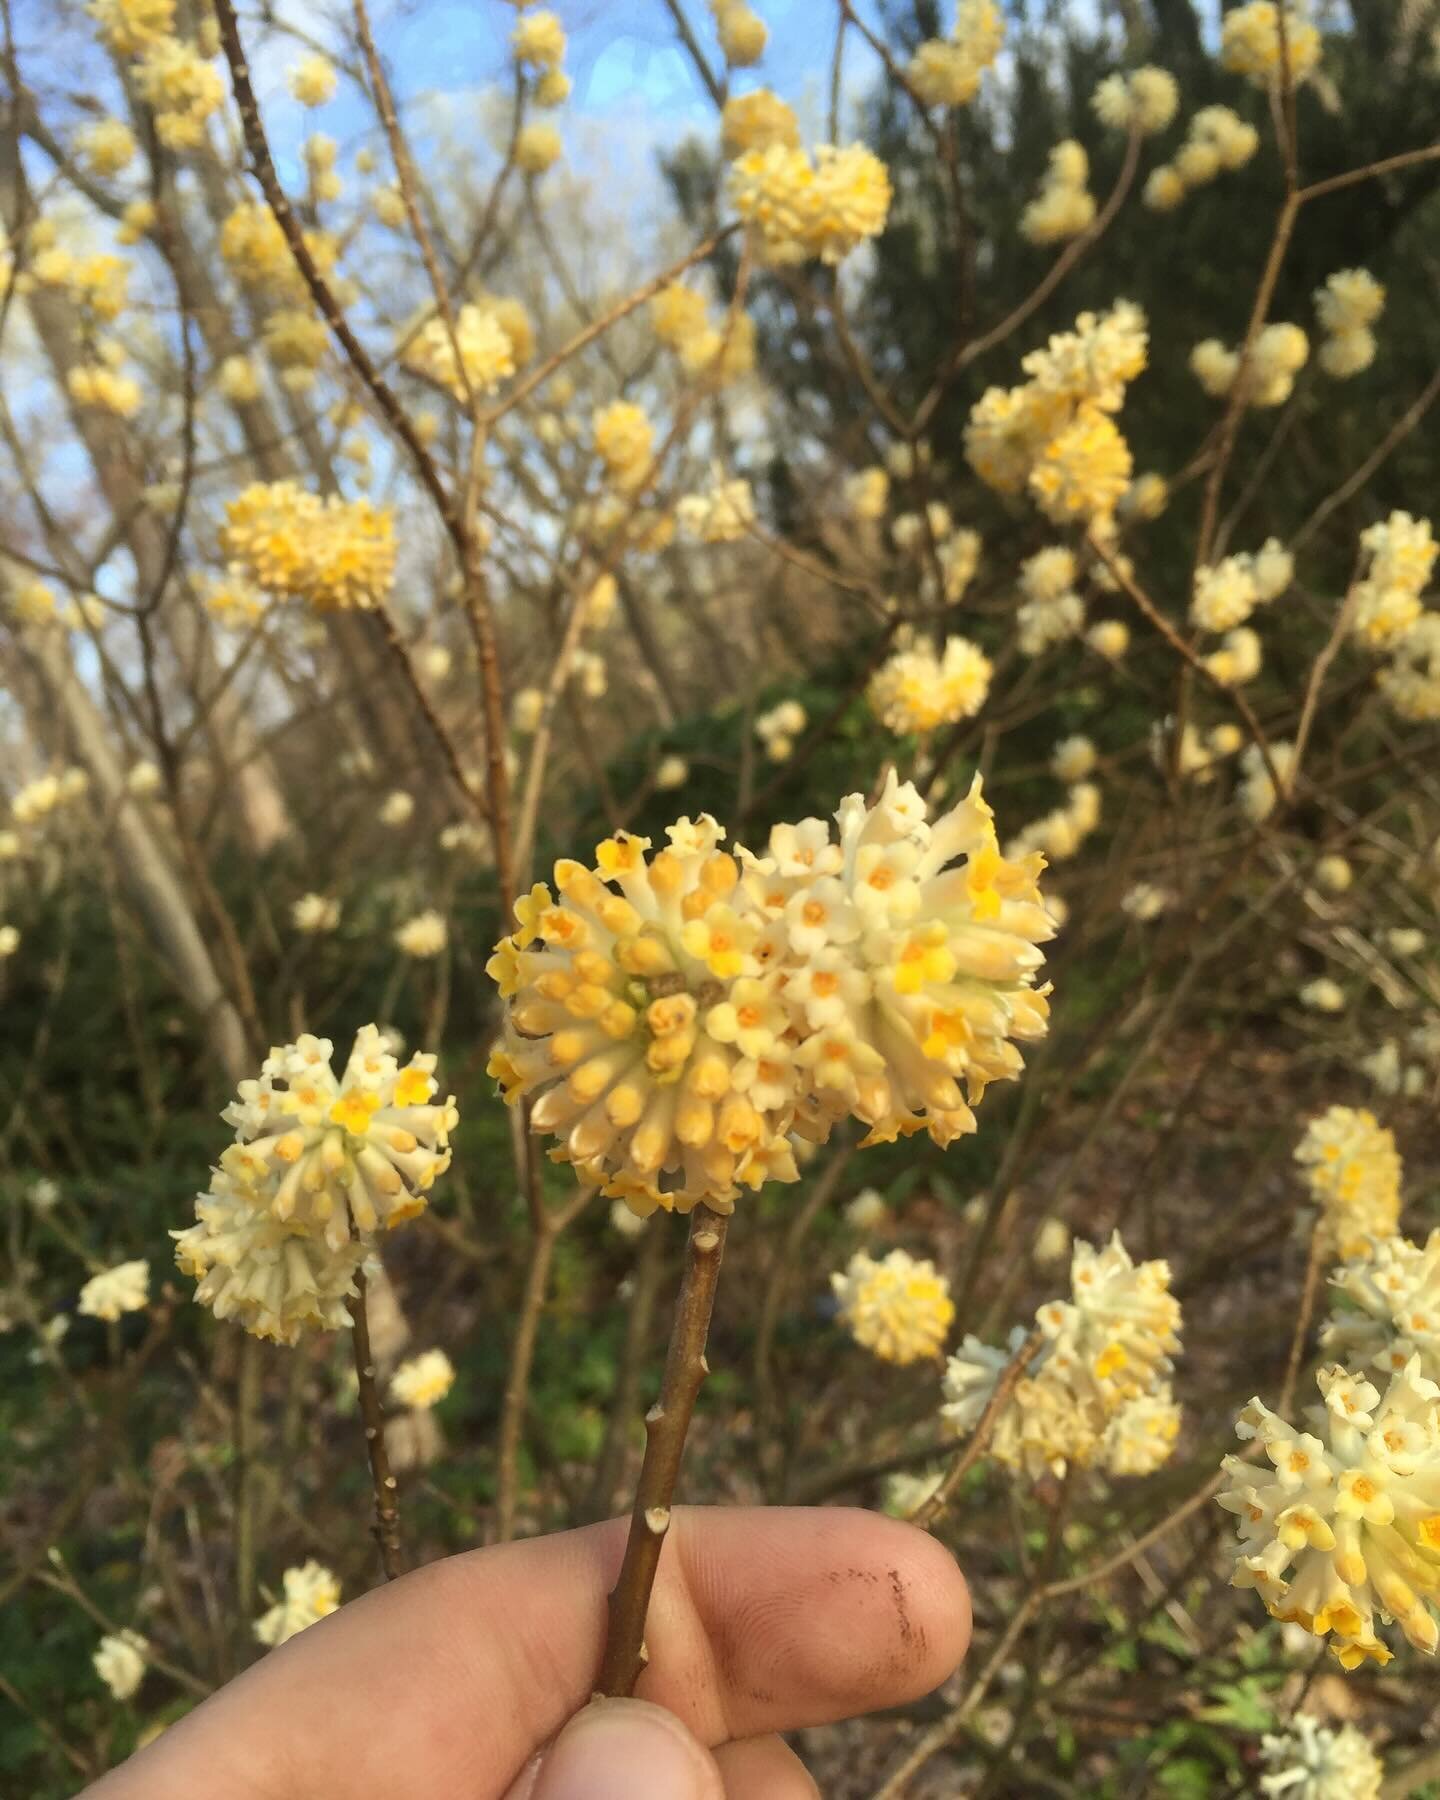 Thrilled to discover a beautiful Chinese Paperbush (Edgeworthia papyrifera) on a client&rsquo;s property today! Nature&rsquo;s little surprises never fail to inspire awe. #ArborCare #TreeSpecialists #ChinesePaperbush #UnexpectedBeauty